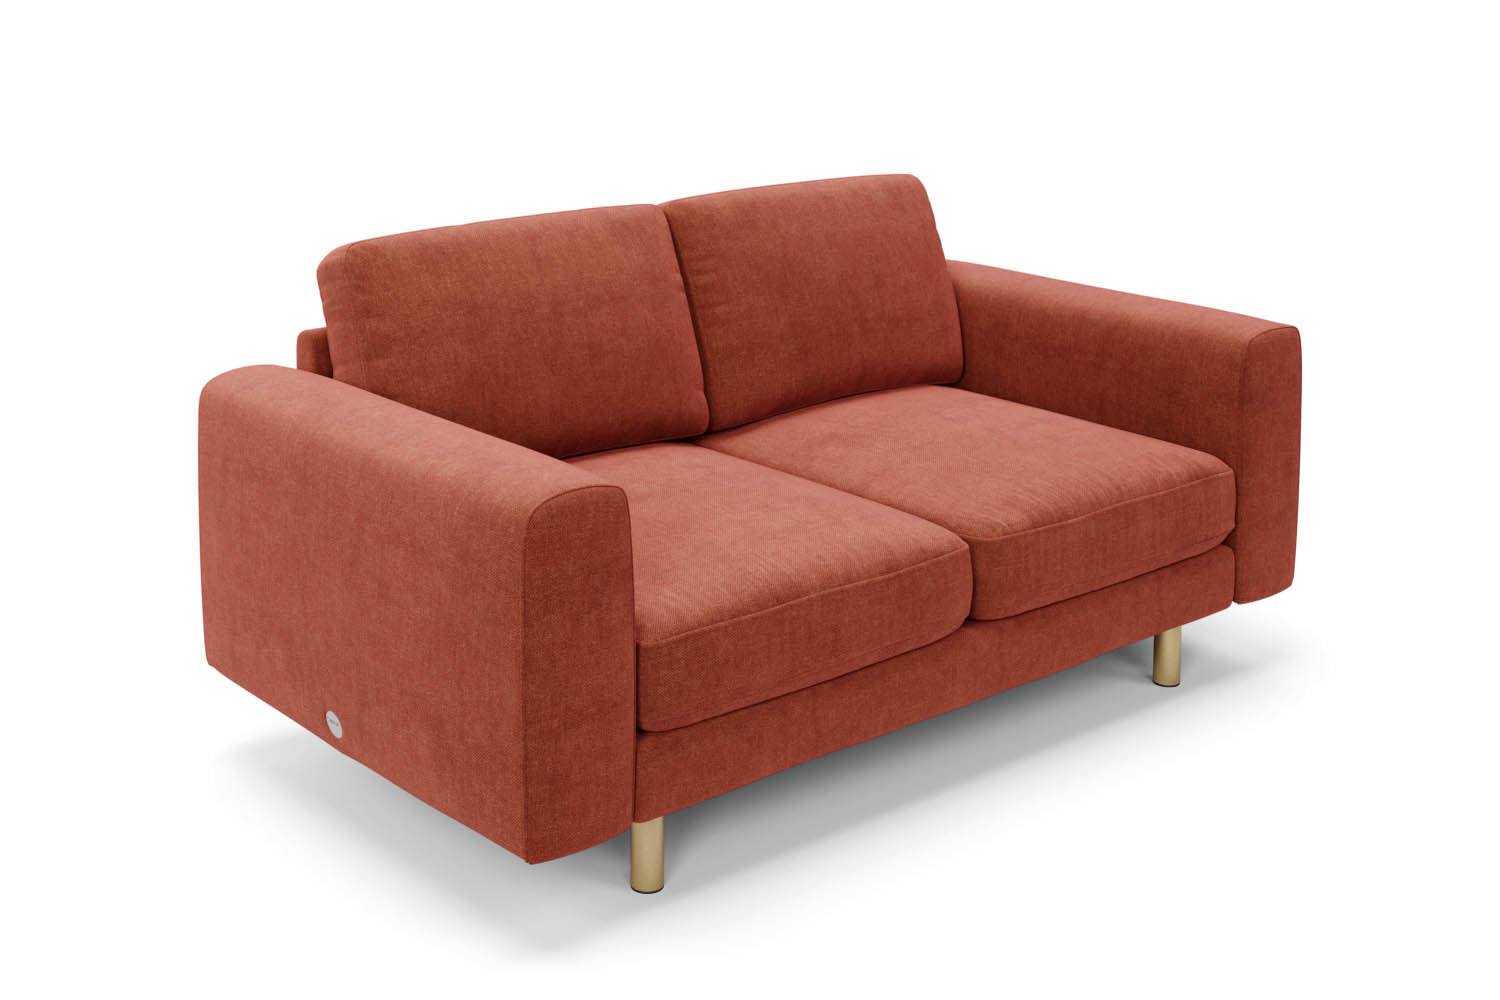 The Big Chill 2 Seater Sofa in Spice Chenille with metal legs